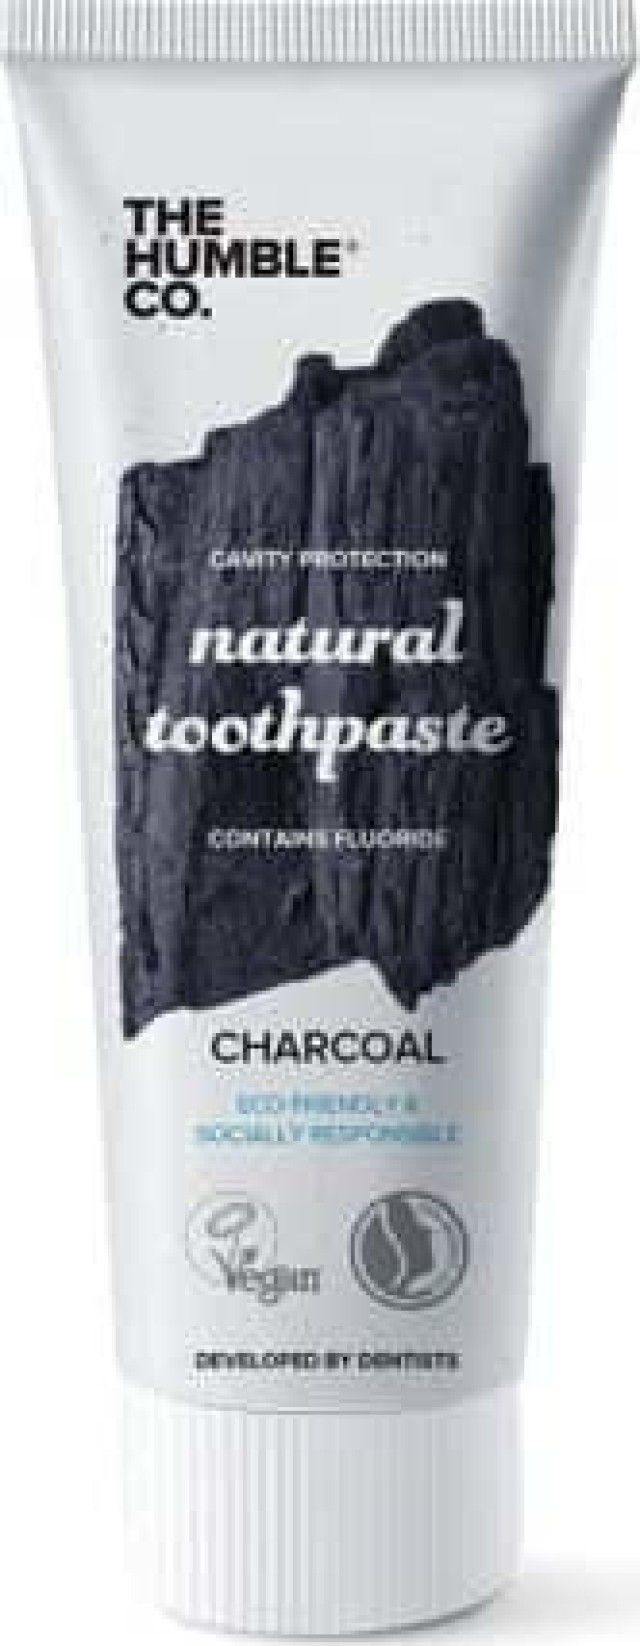 The Humble Co. Natural Toothpaste Charcoal Φυσική Οδοντόκρεμα Με Ενεργό Άνθρακα Για Λεύκανση 75 ml product photo